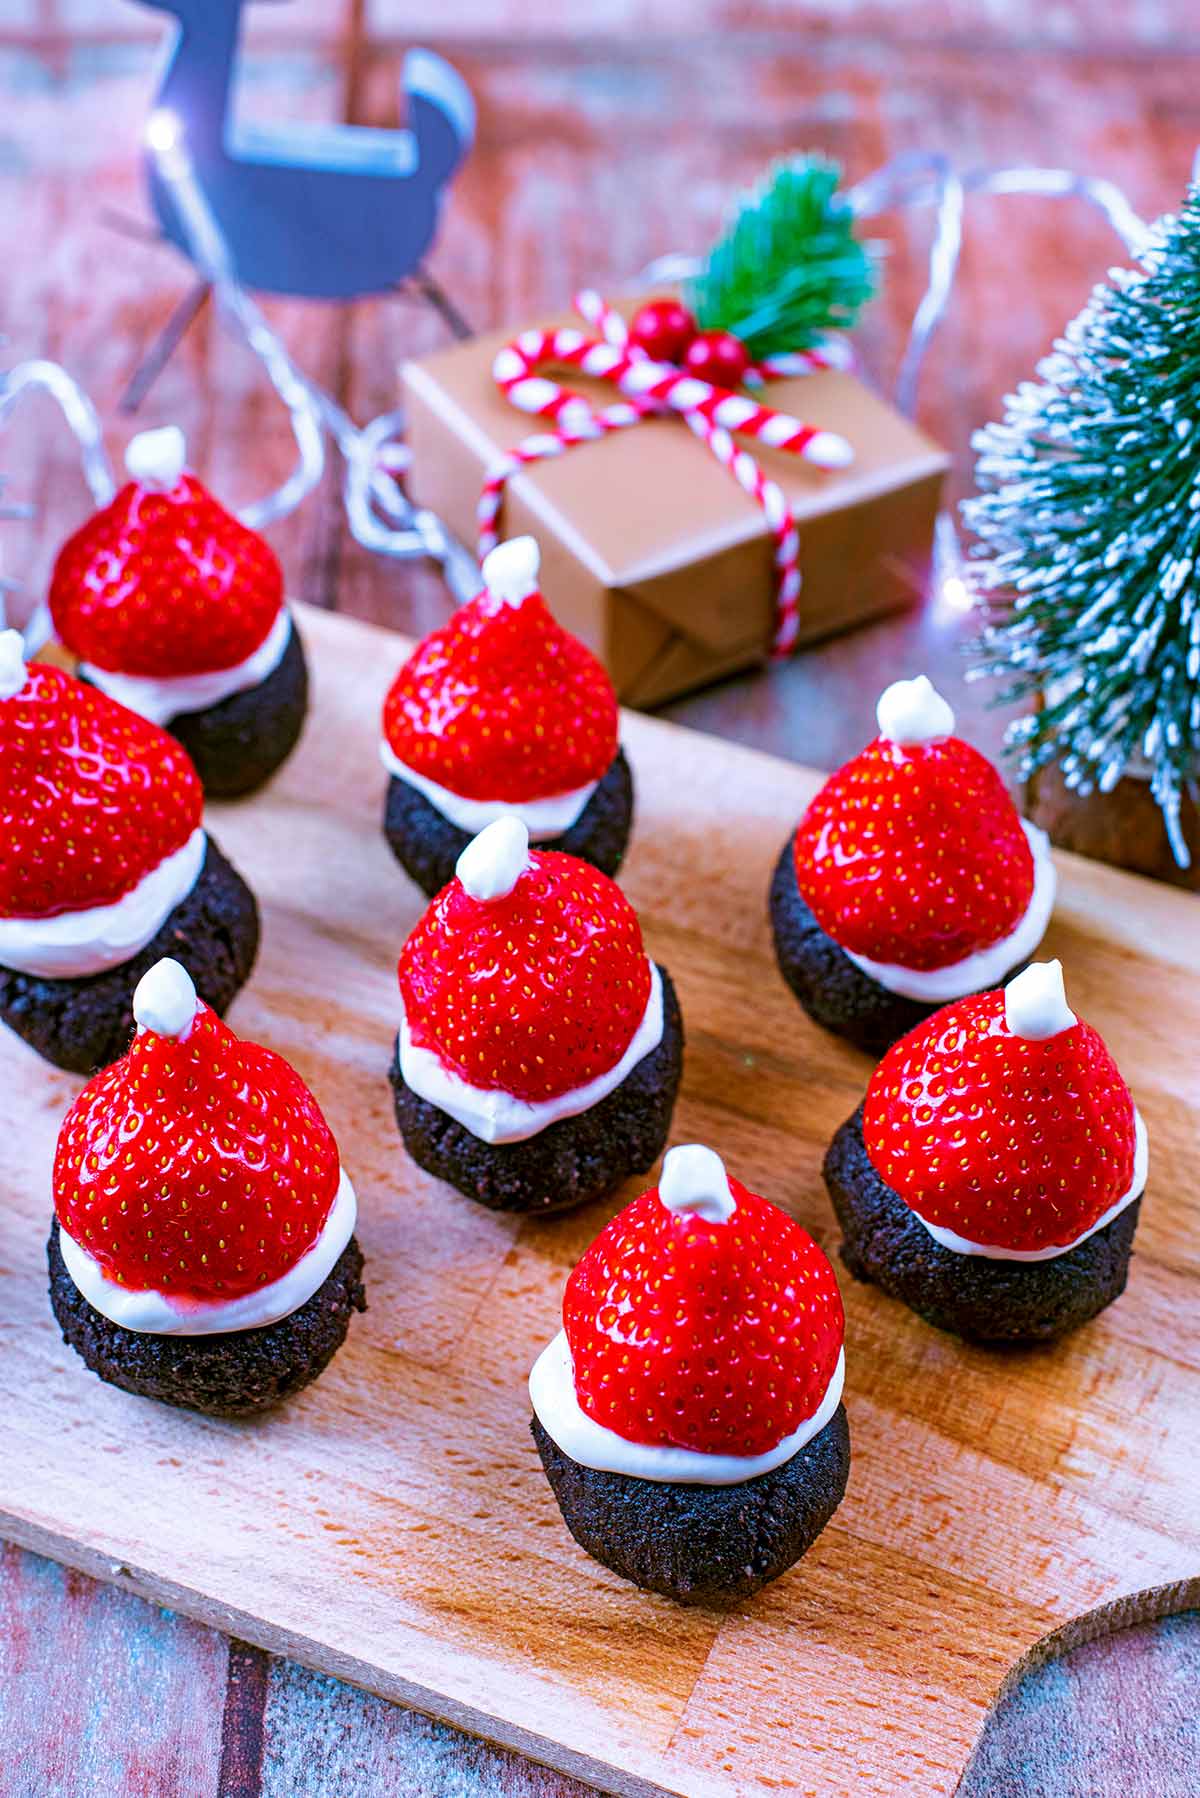 Raw chocolate brownies topped with a strawberry to make it look like a Santa hat.